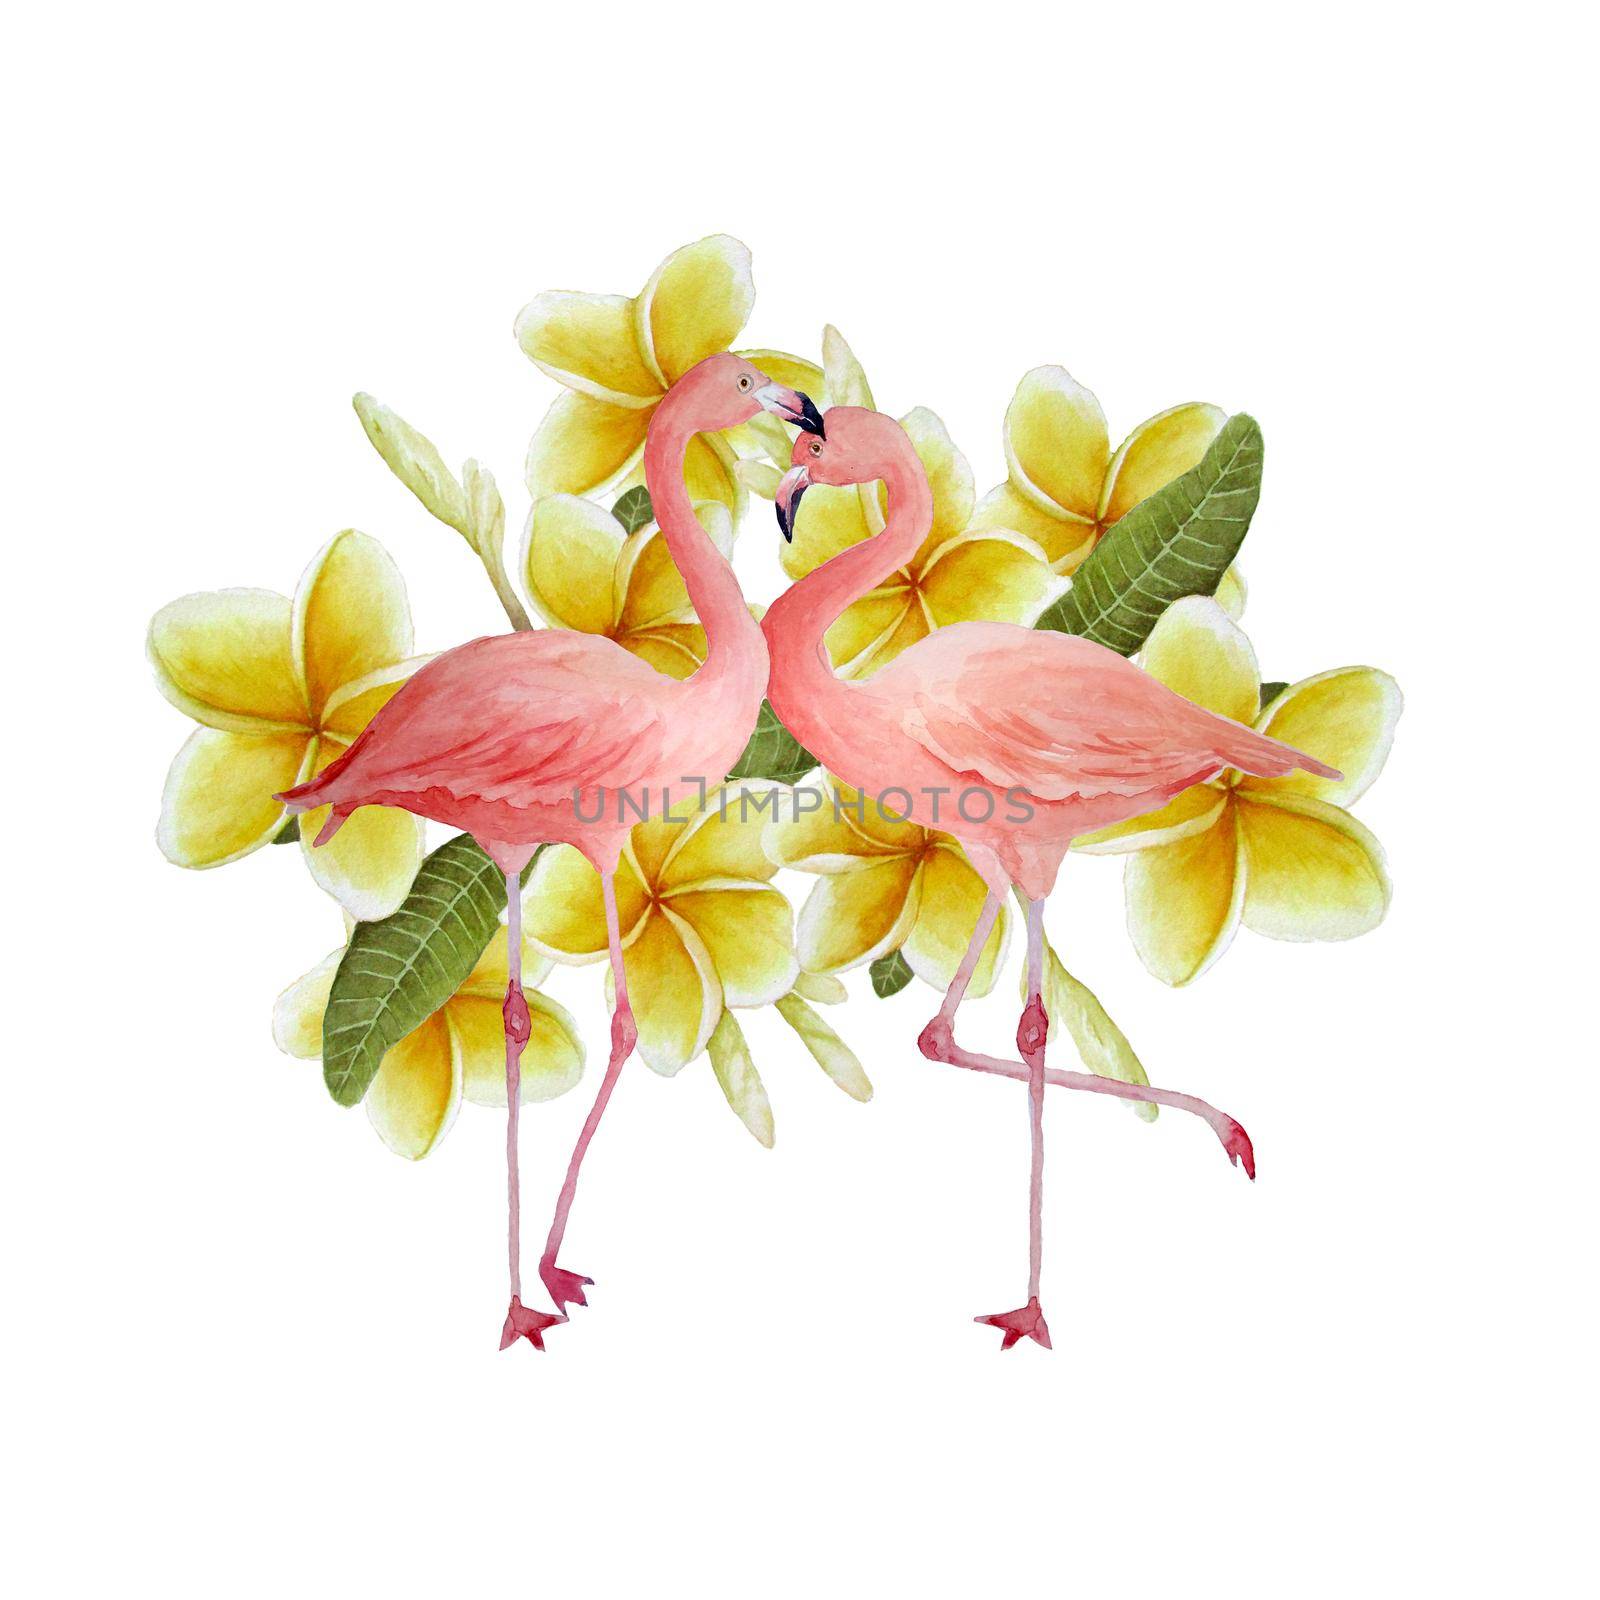 Two pink flamingo, romantic couple in love with yellow plumeria frangipani flowers. Tropical exotic bird rose flamingos isolated on white background. Wedding cards invitation st valentine day. Watercolor hand drawn animal illustration. by Lagmar